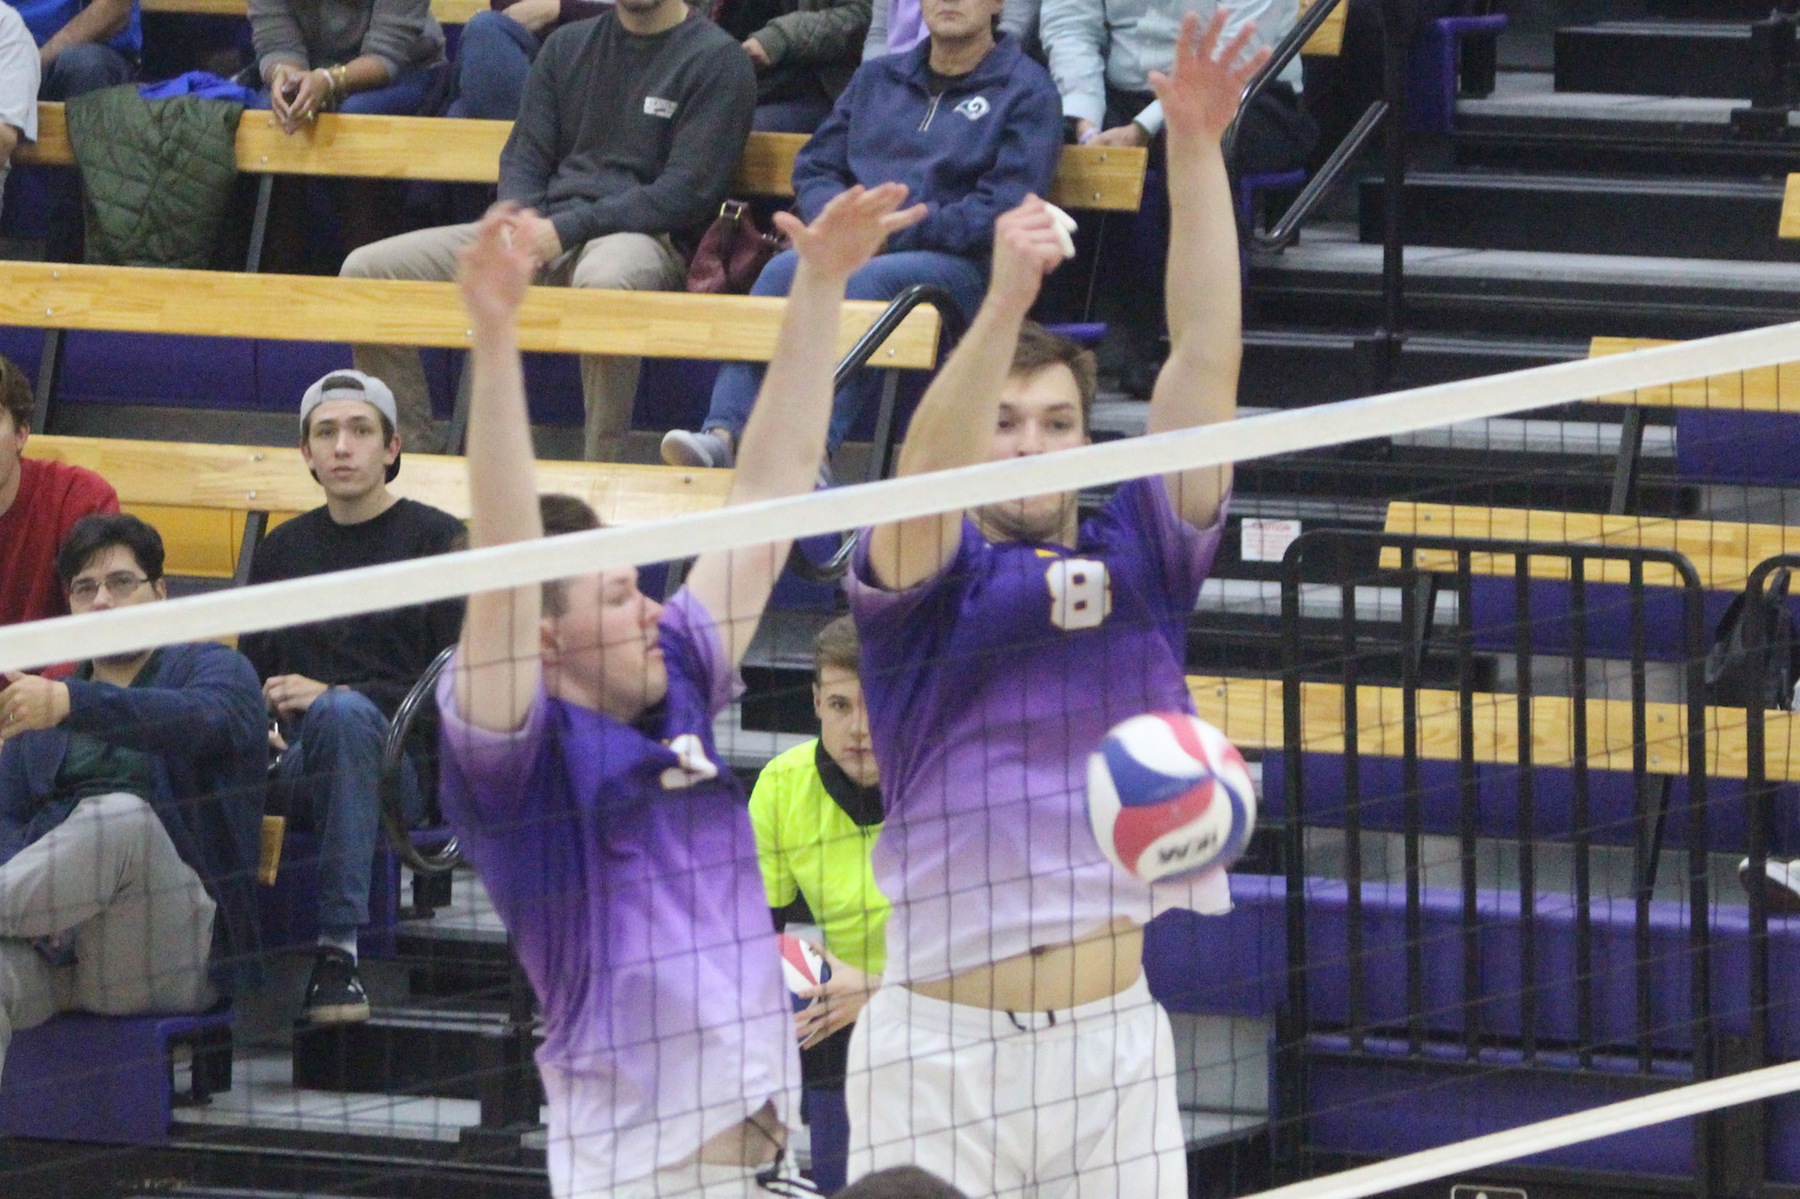 Nick Christy and Patrick Rowe combine for a block.